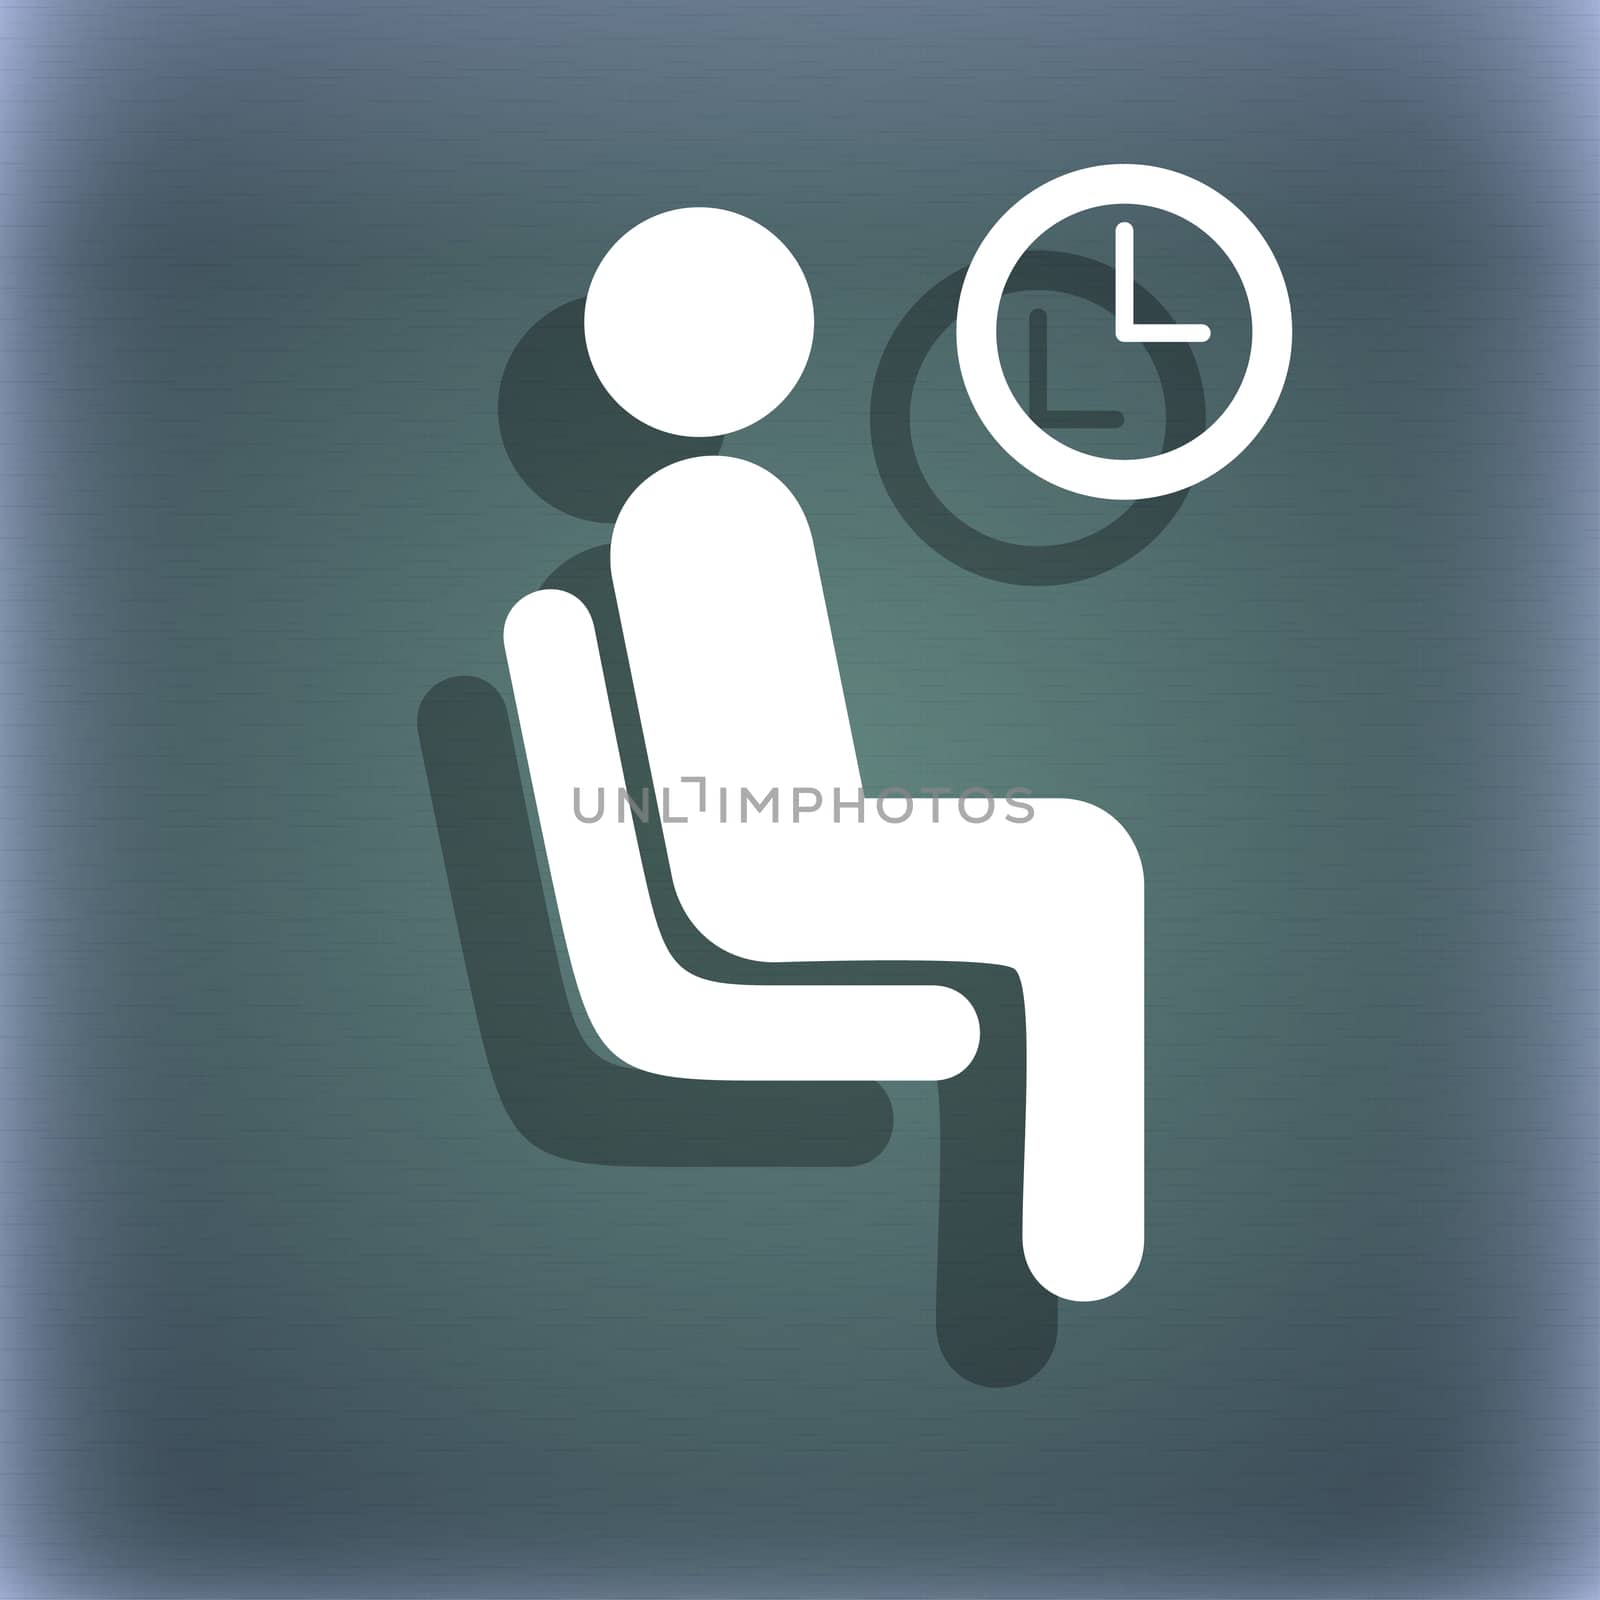 waiting icon symbol on the blue-green abstract background with shadow and space for your text. illustration